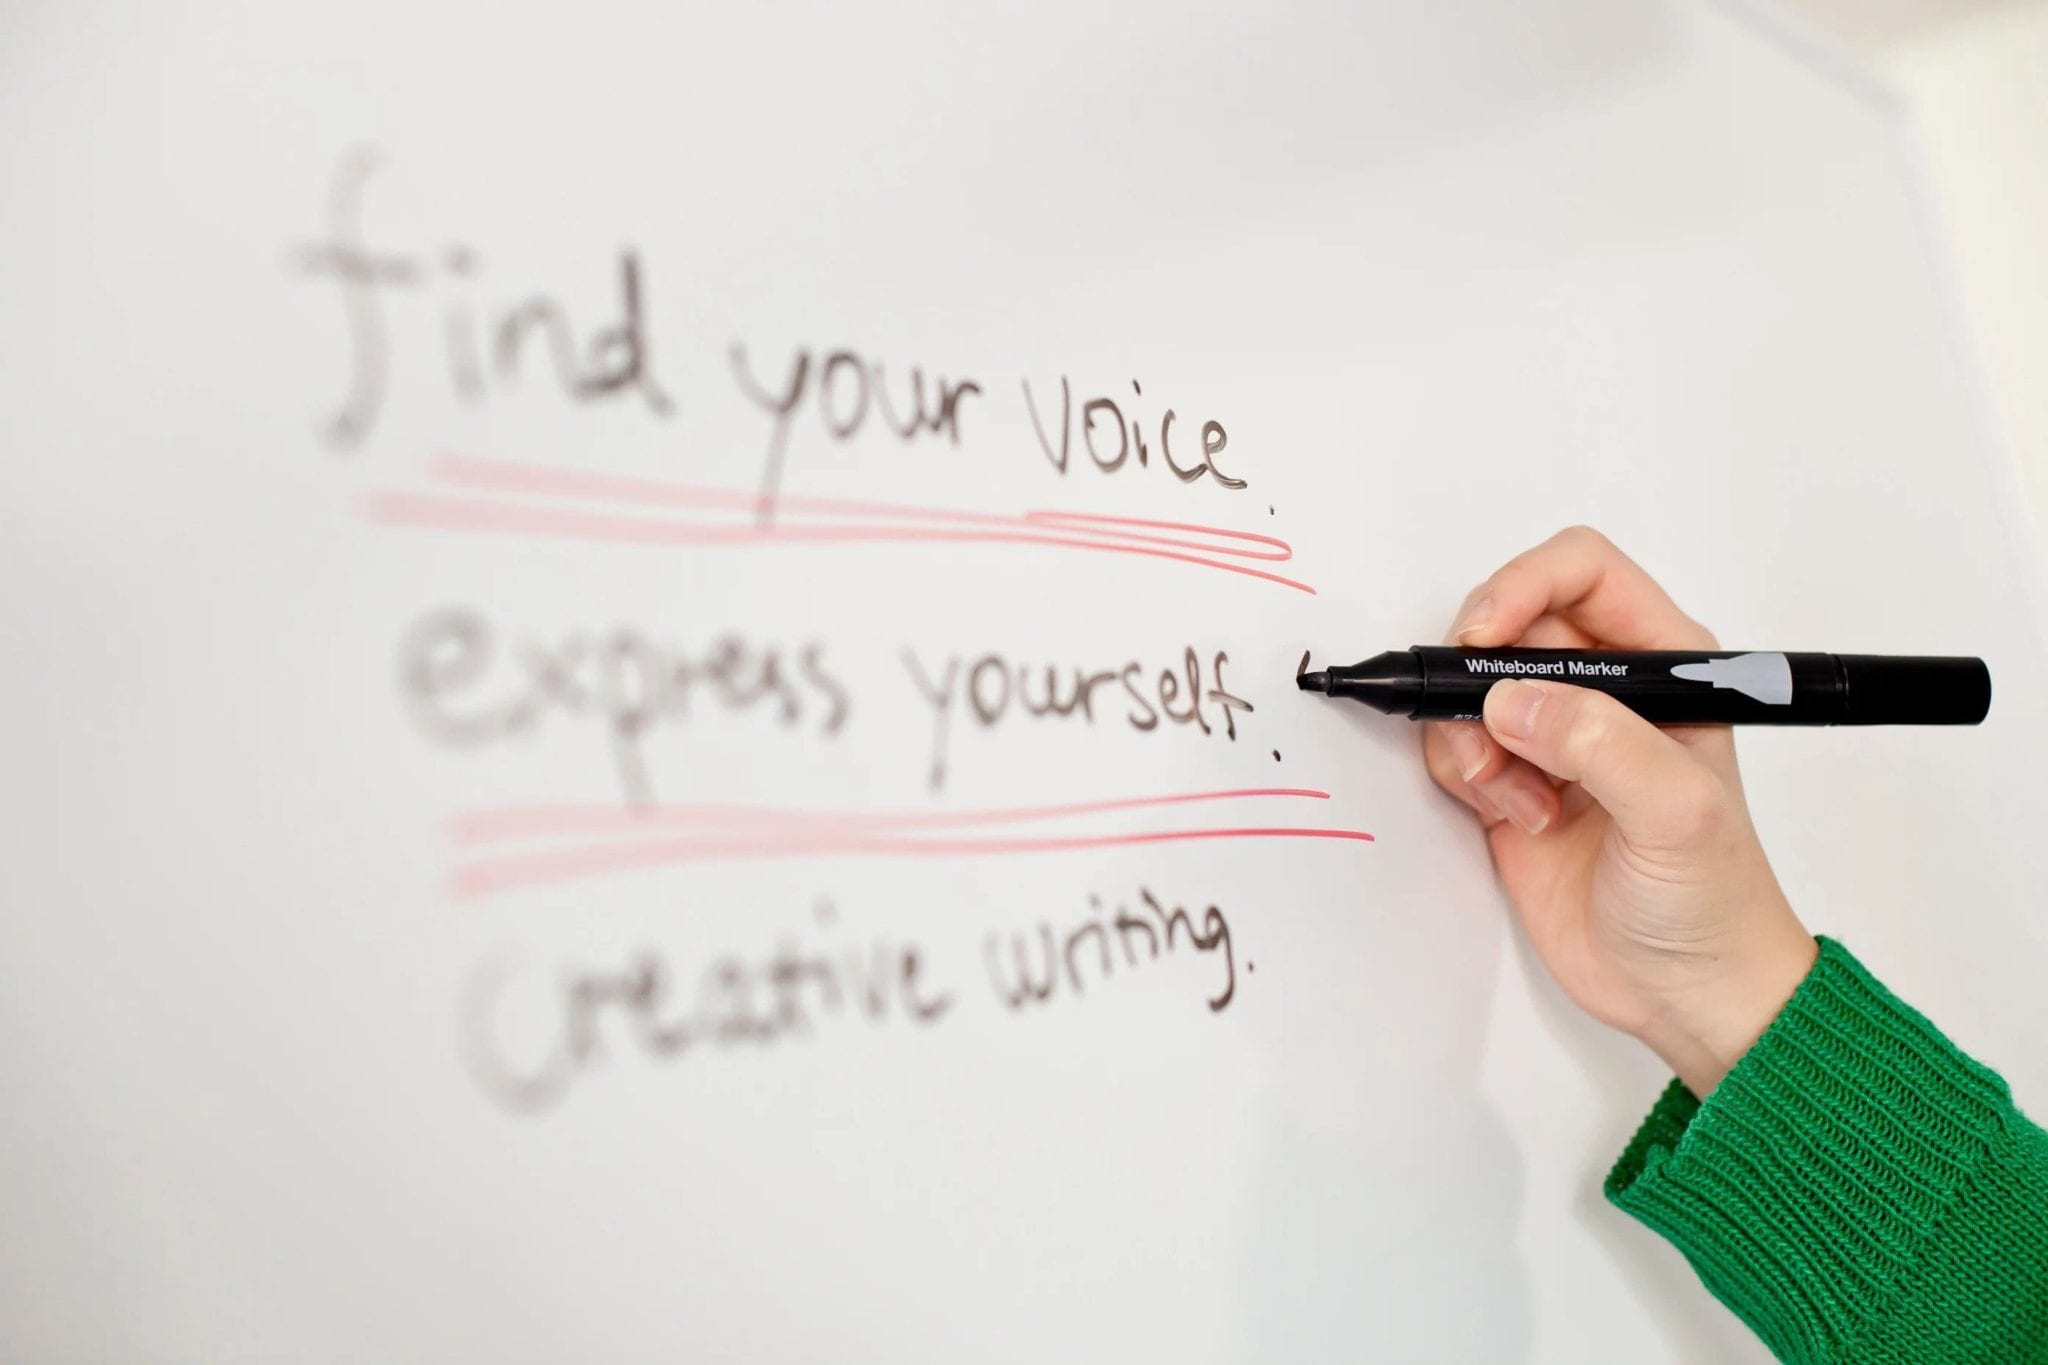 Find your voice and express yourself with creative writing